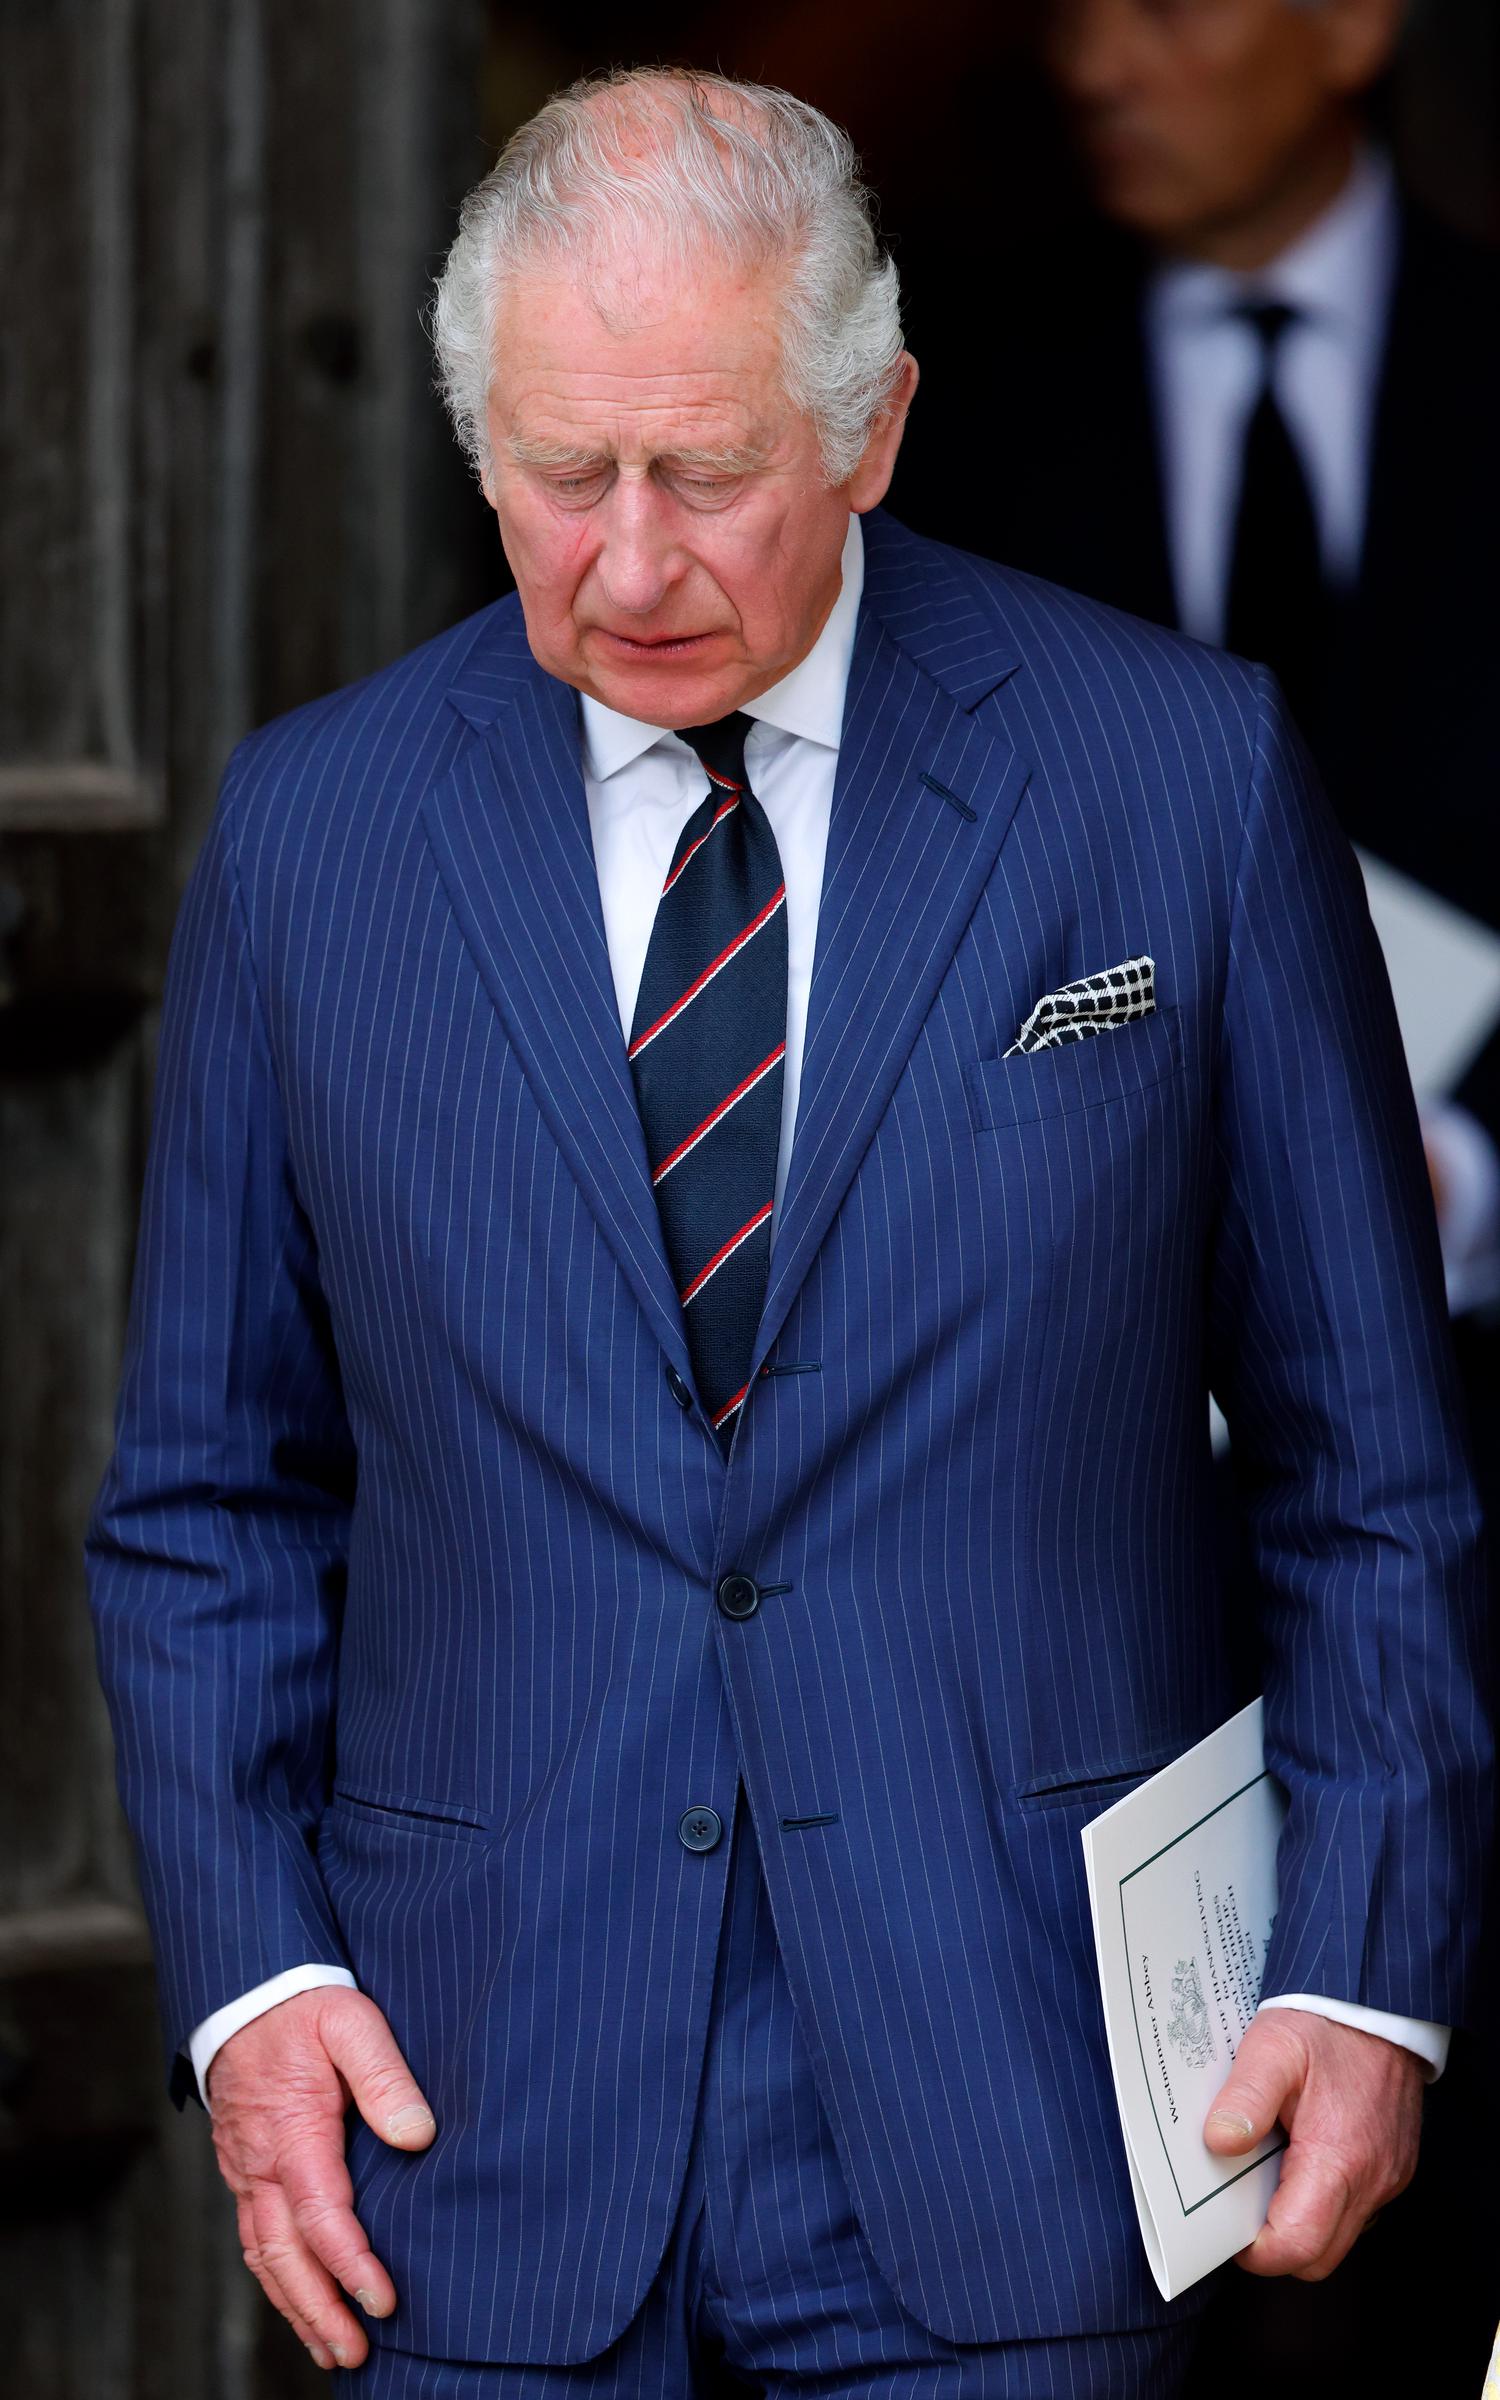 King Charles III at a Service of Thanksgiving for the life of Prince Philip, Duke of Edinburgh in London, England on March 29, 2022 | Source: Getty Images